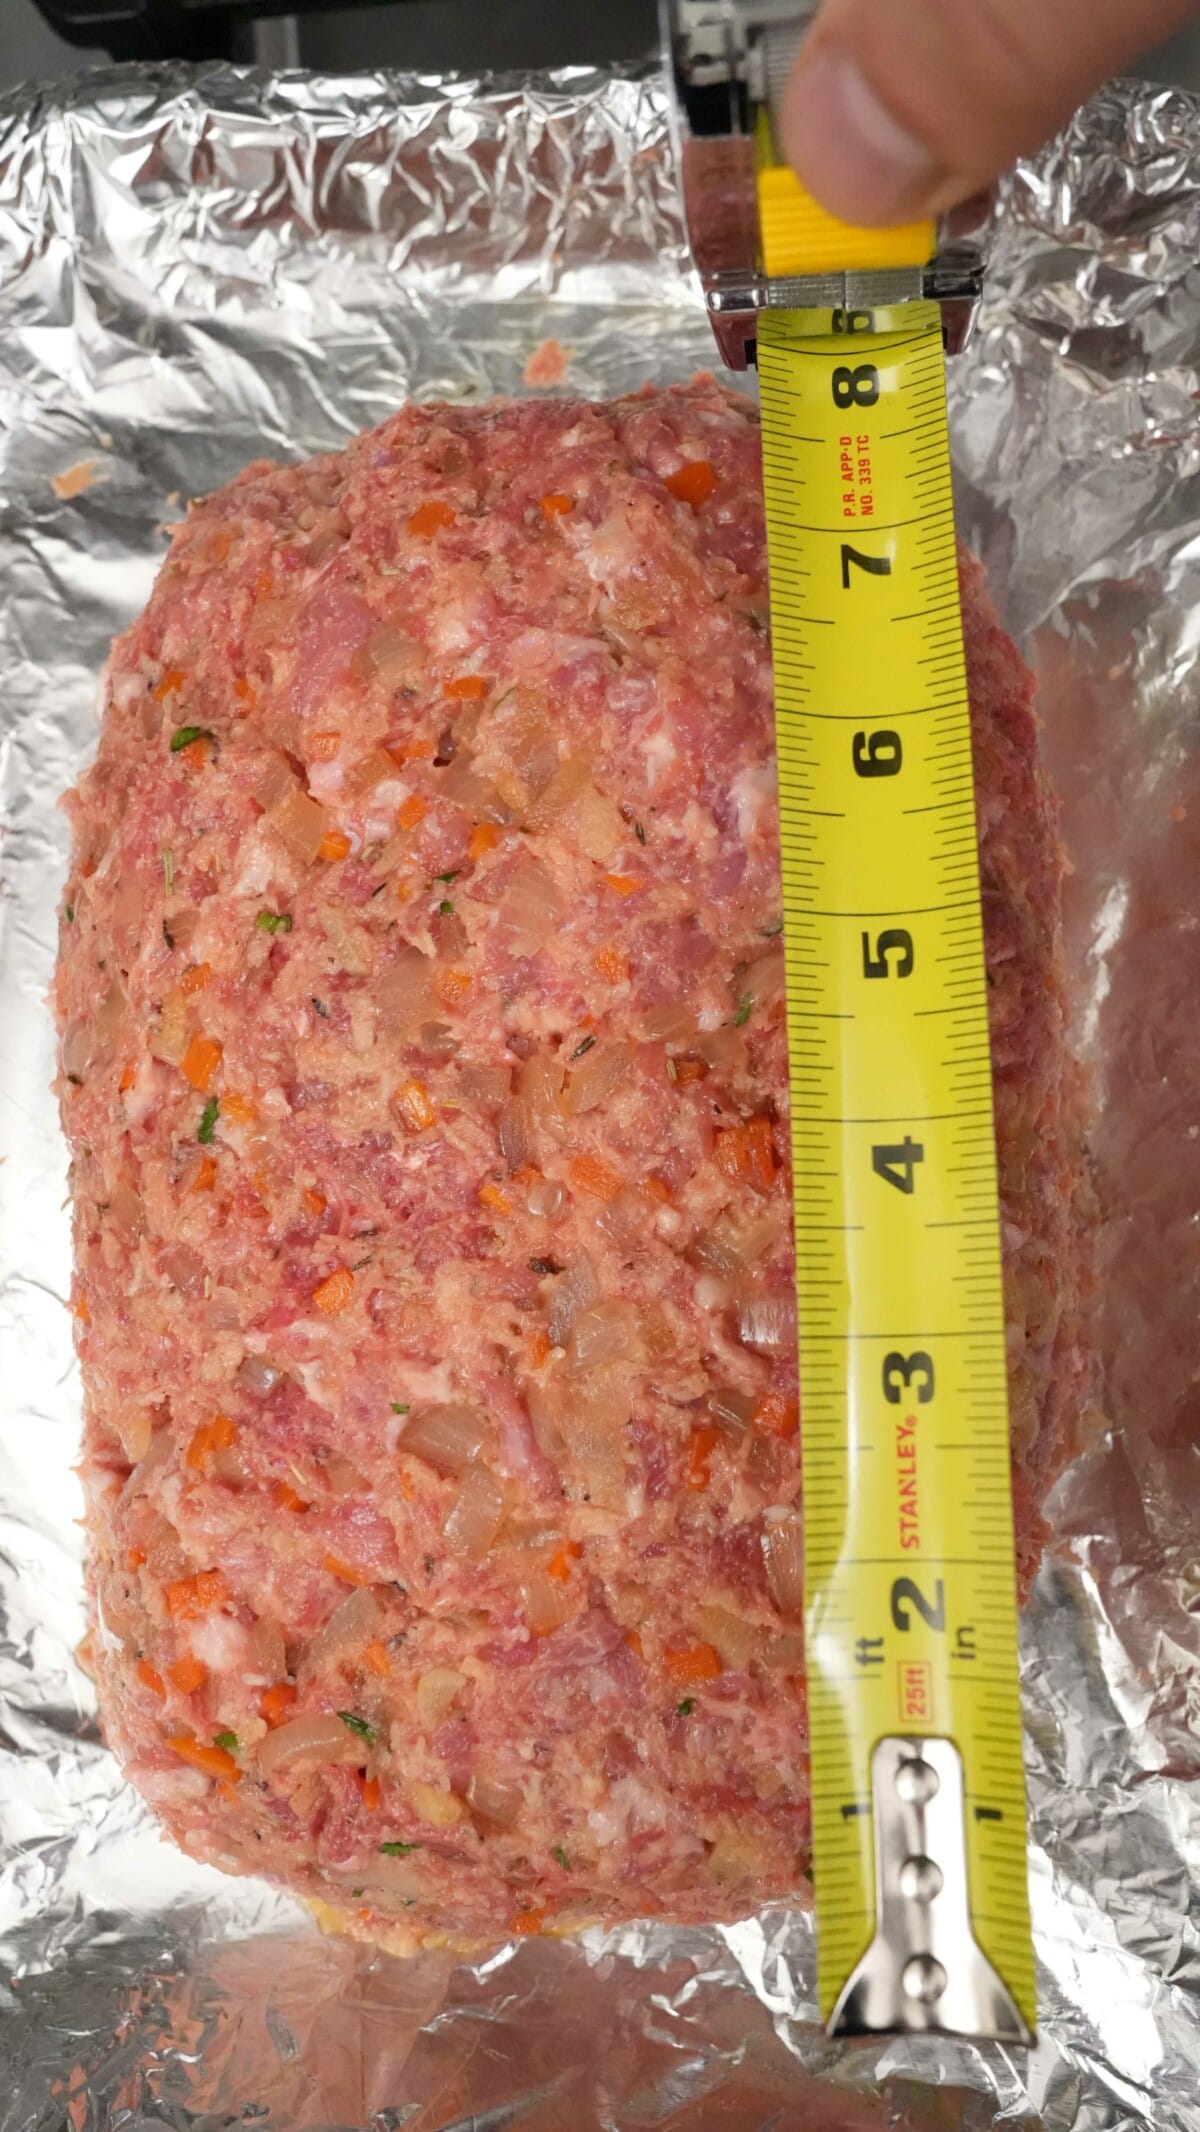 A measuring tape showing the length of the meatloaf.